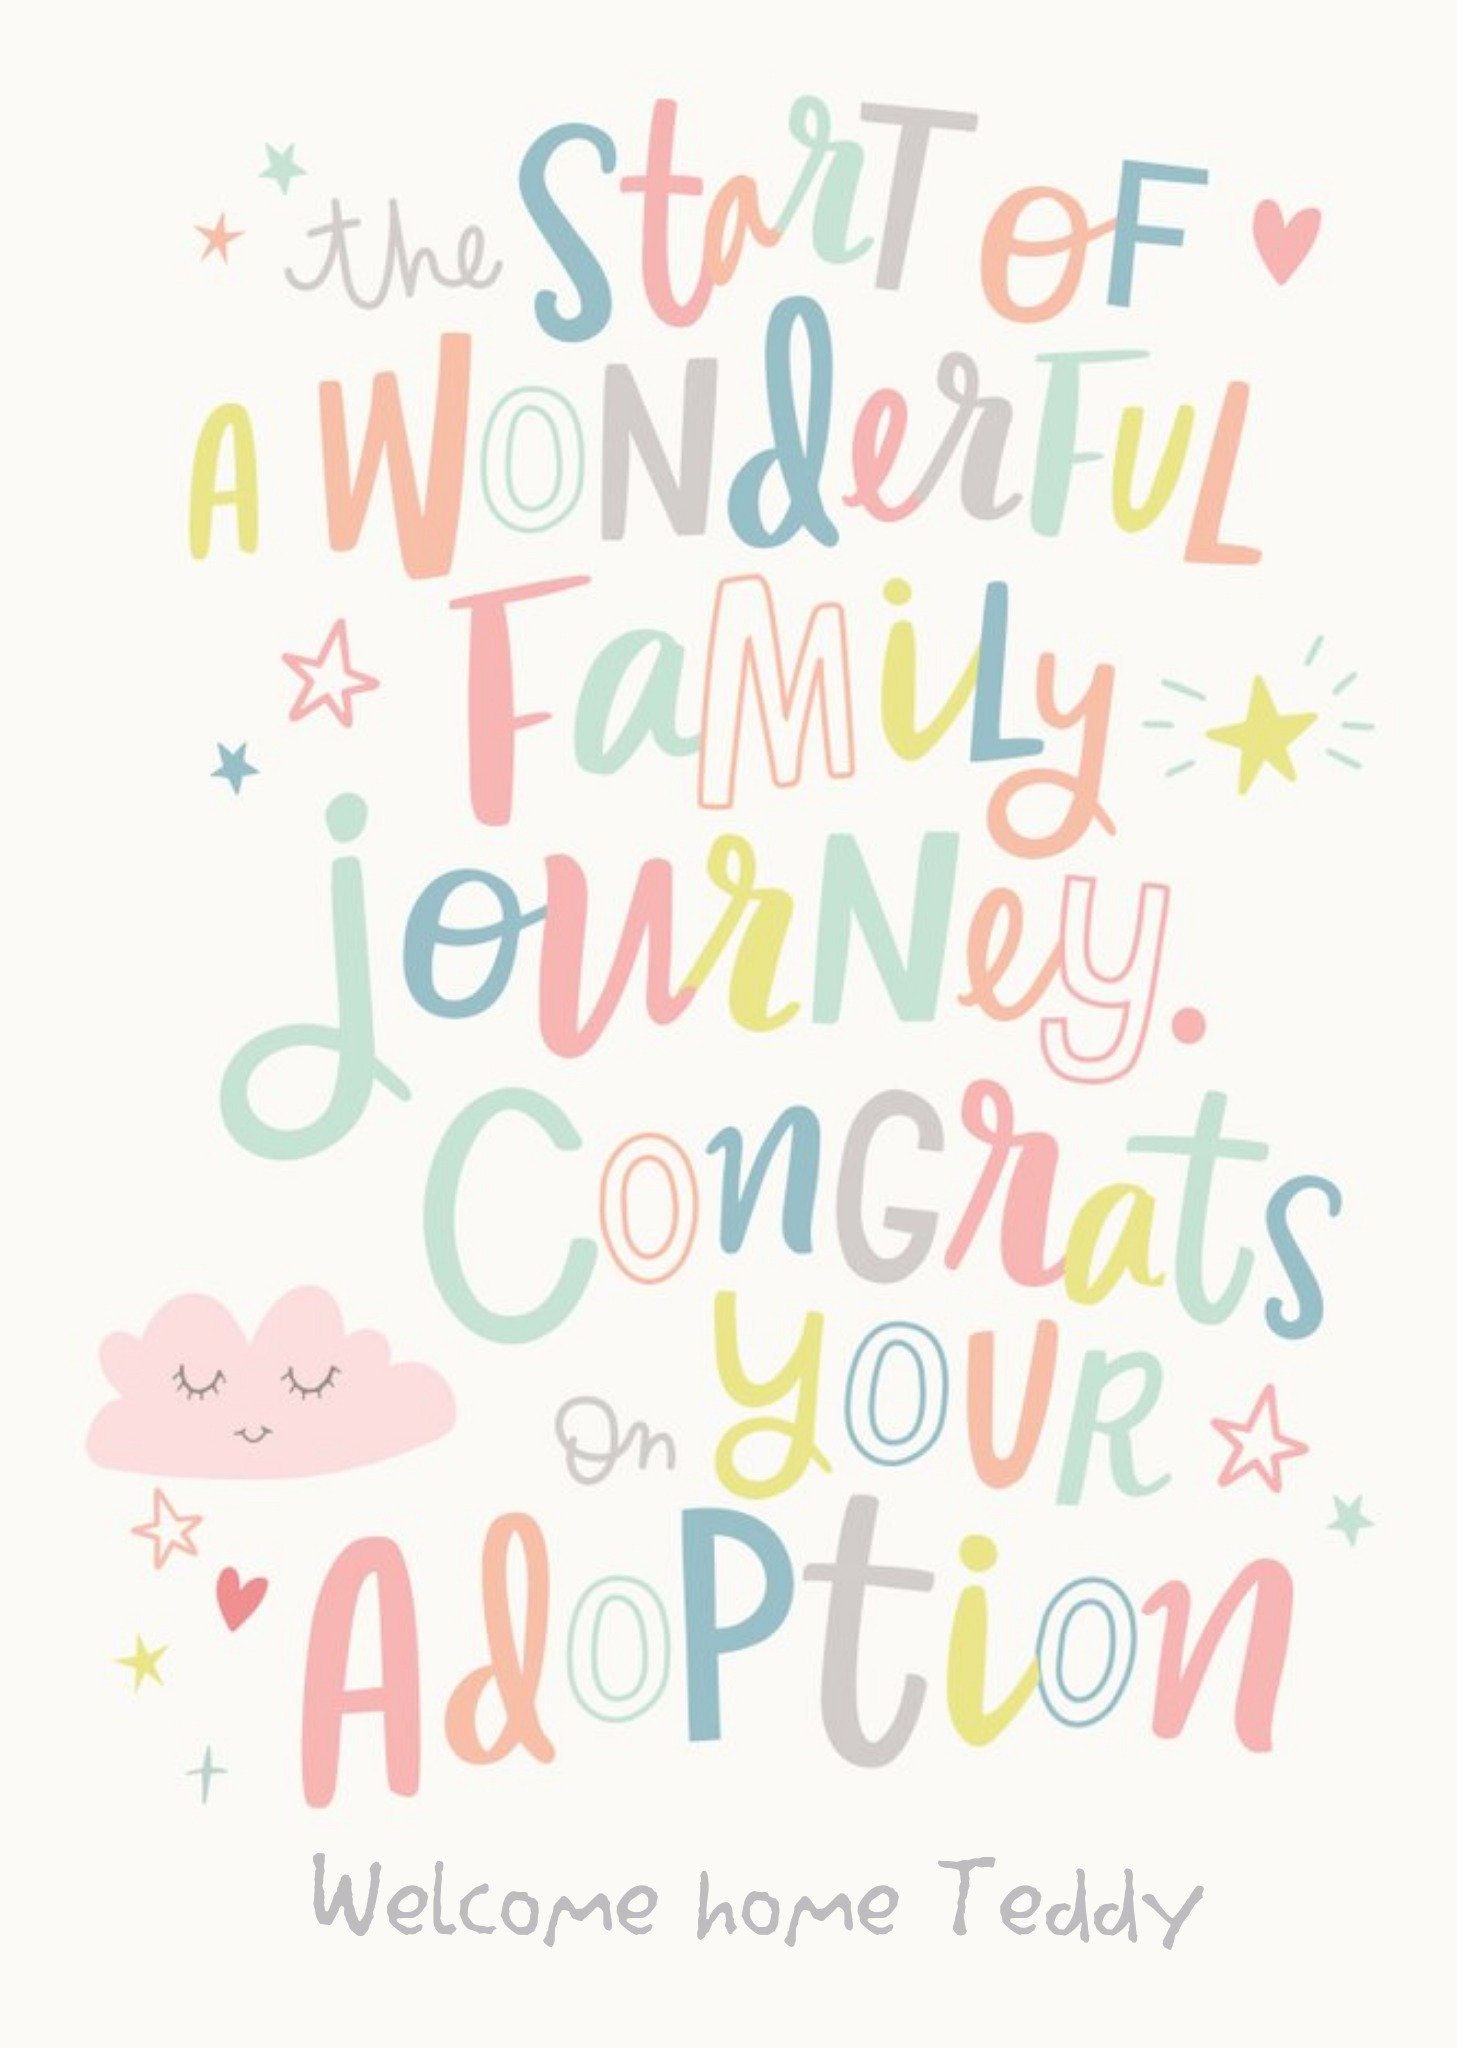 Moonpig Colourful Typography With Stars And Hearts Congratulations On Your Adoption Card Ecard